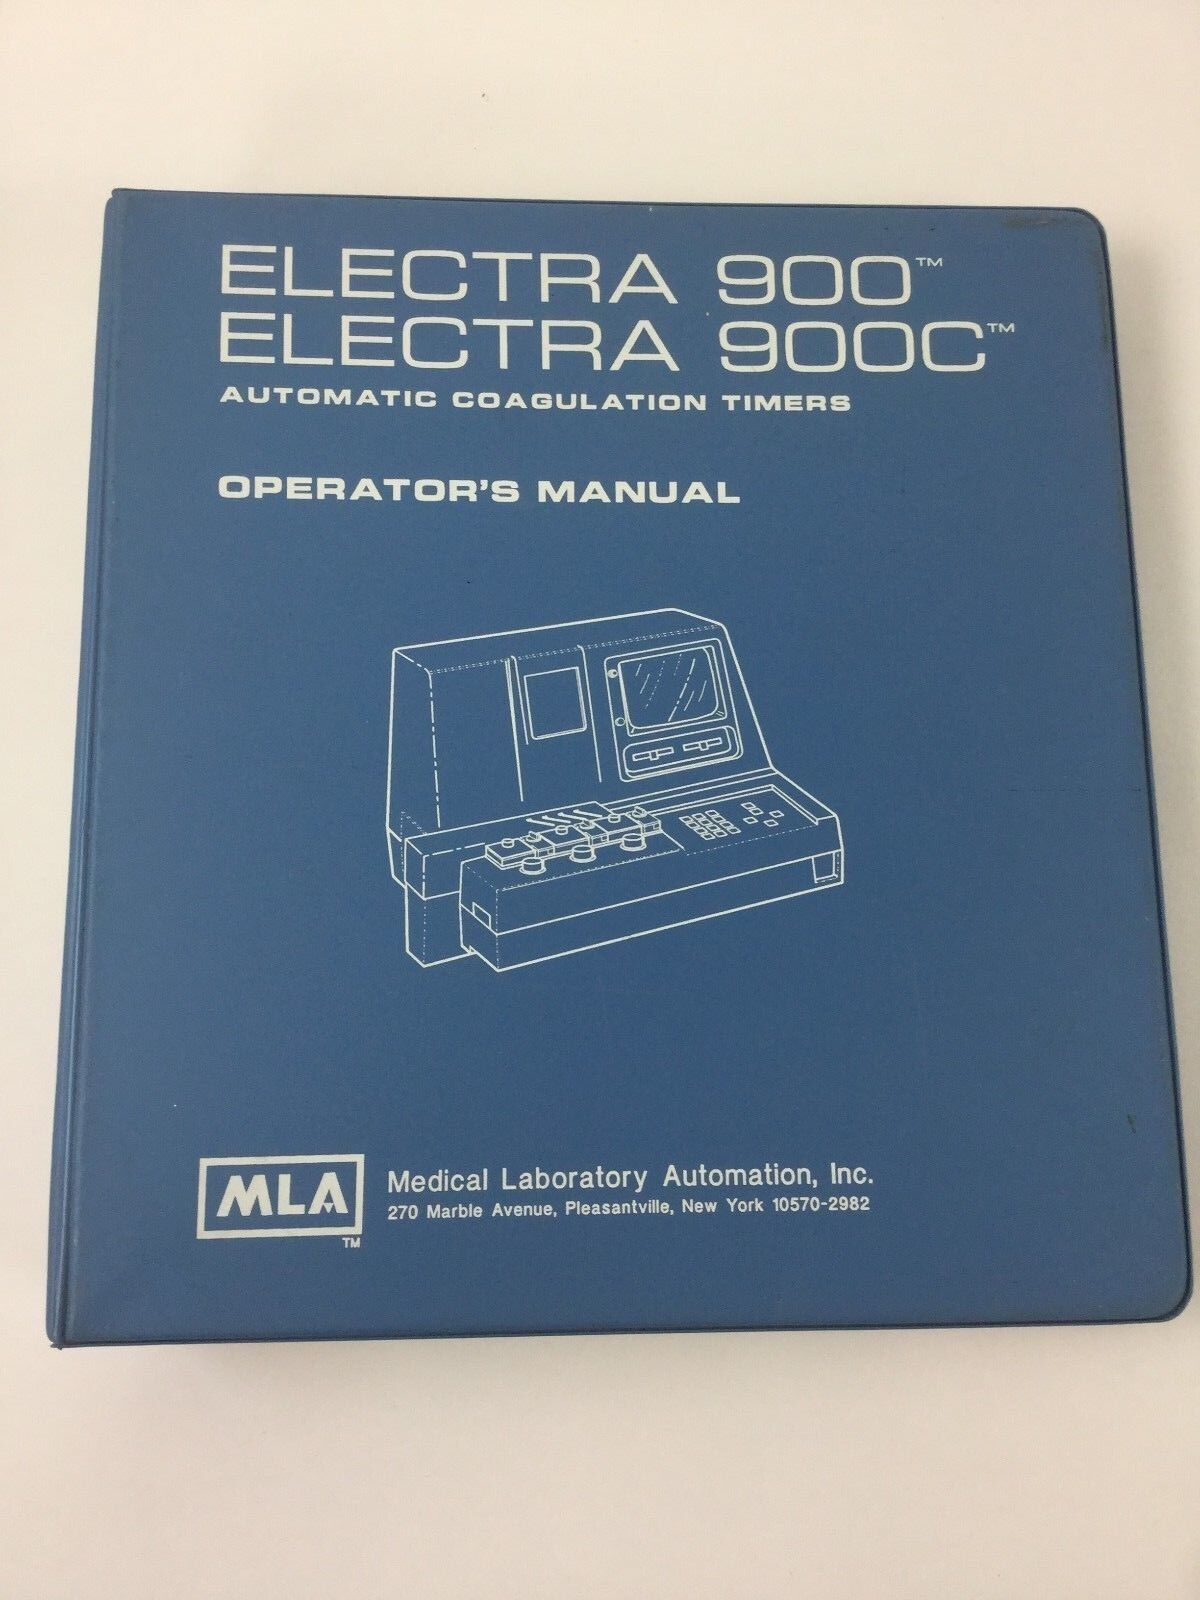 Medical Laboratory Operators Manual for Electra 900 and 900C